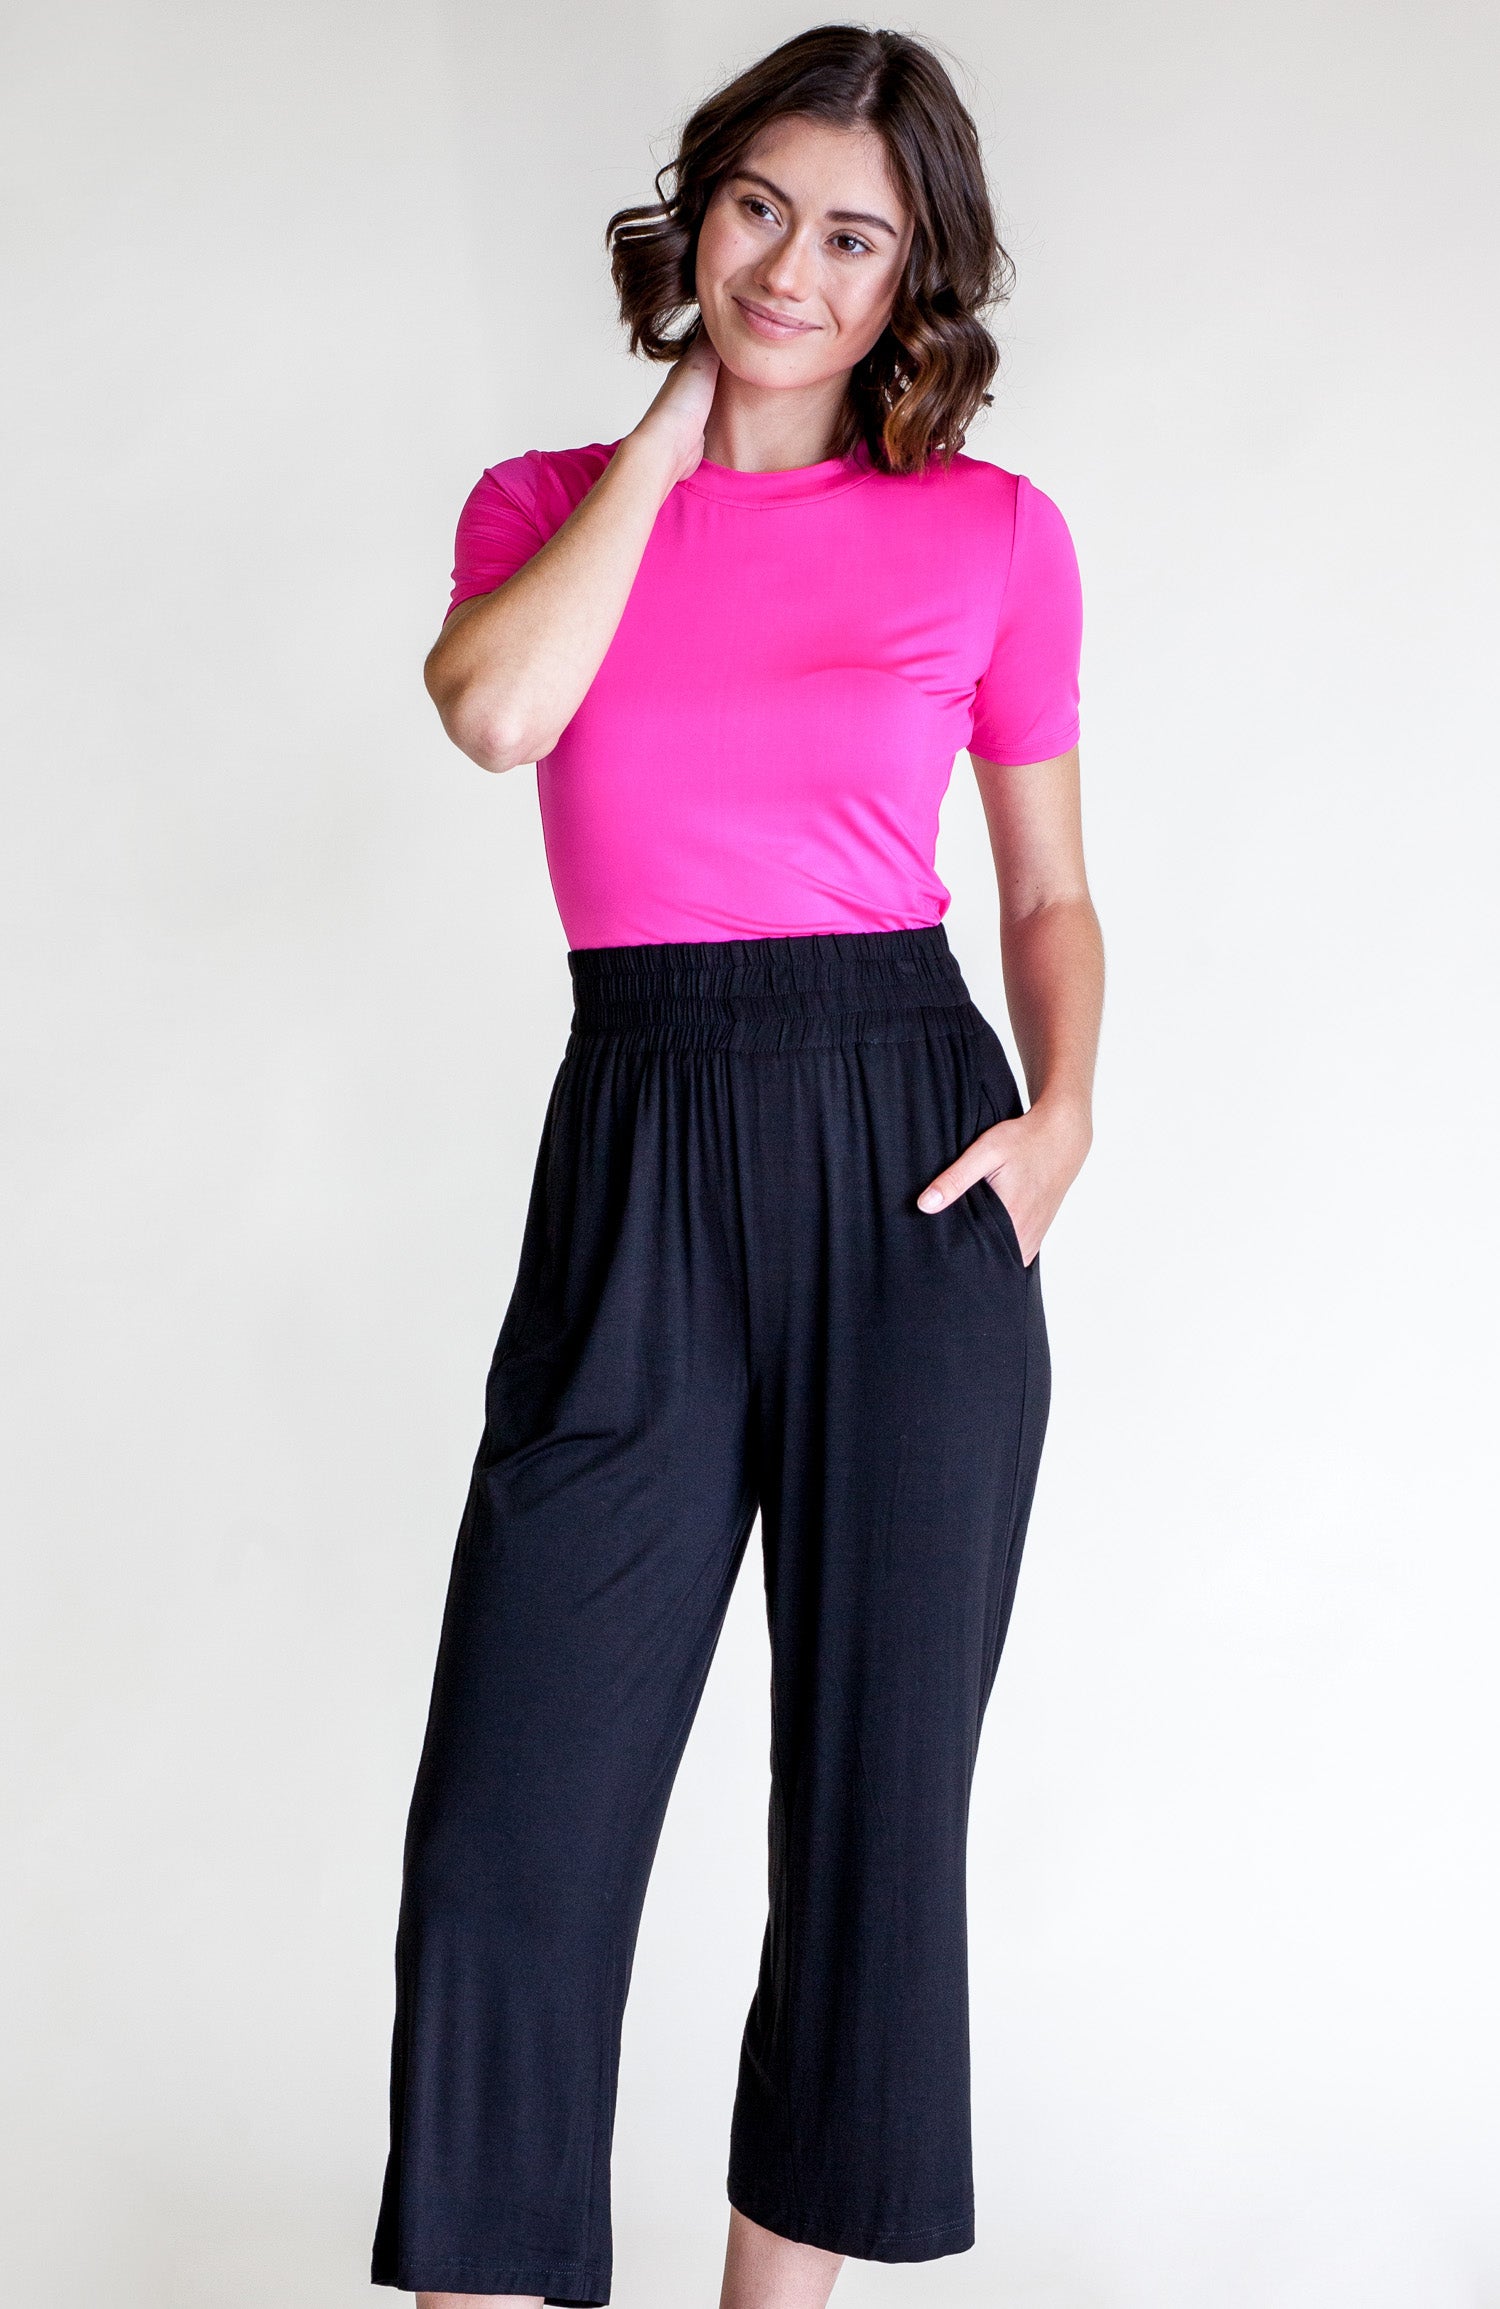 Soccer mom tee Fuschia Pink - Pink Martini Collection